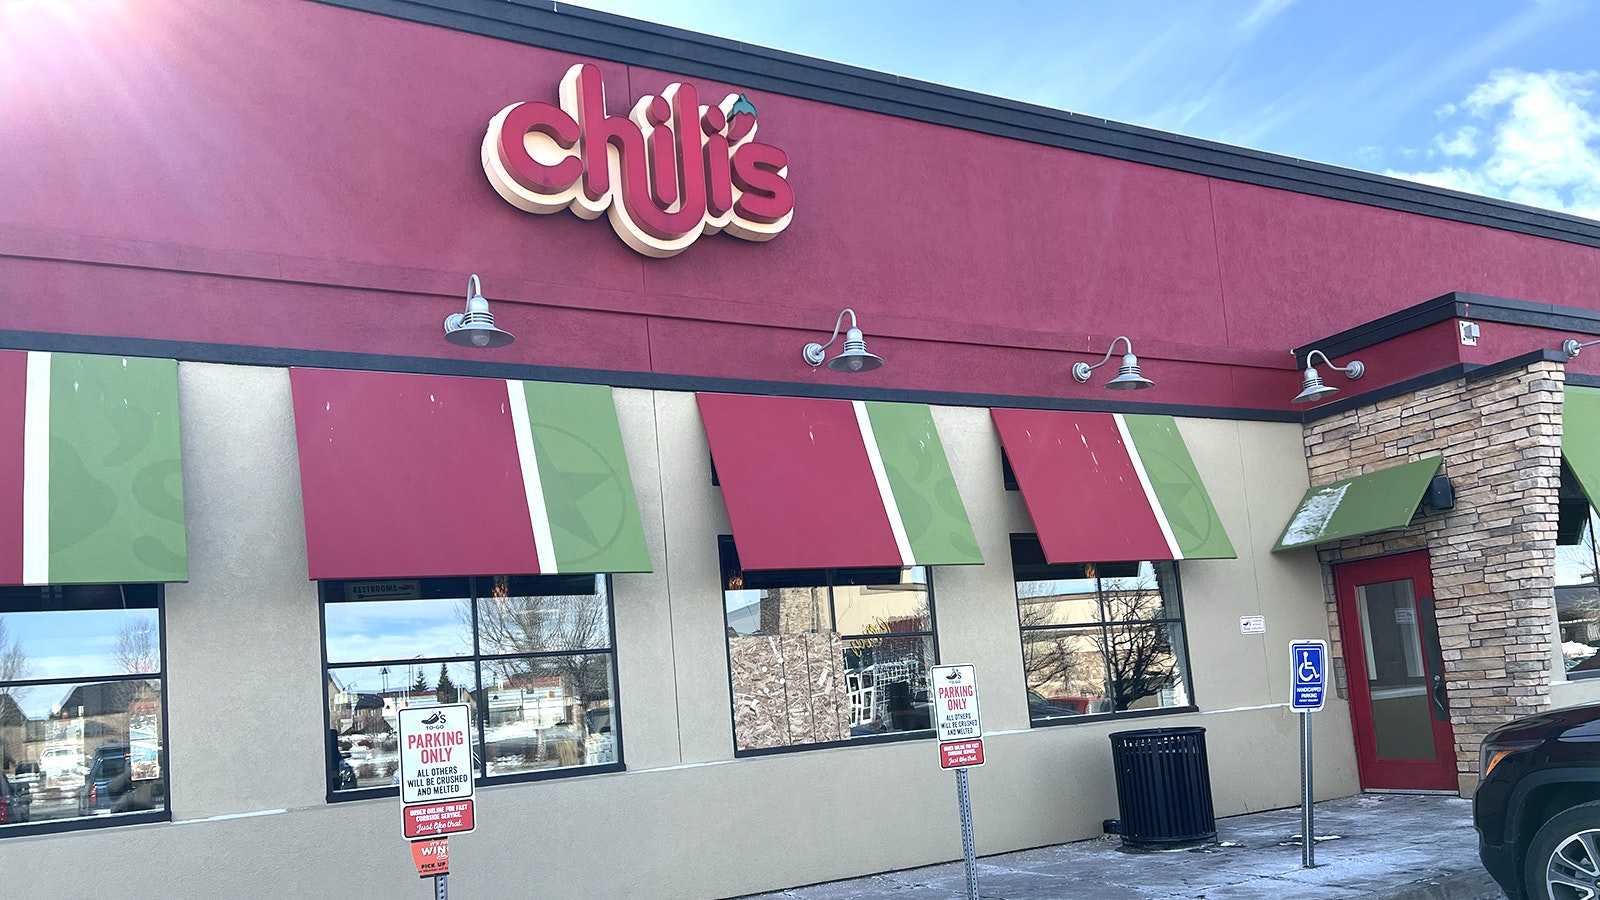 One of the windows broken at the Laramie Chili's restaurant remains boarded up after a man who was trespassed from the property allegedly came back and broke windows.